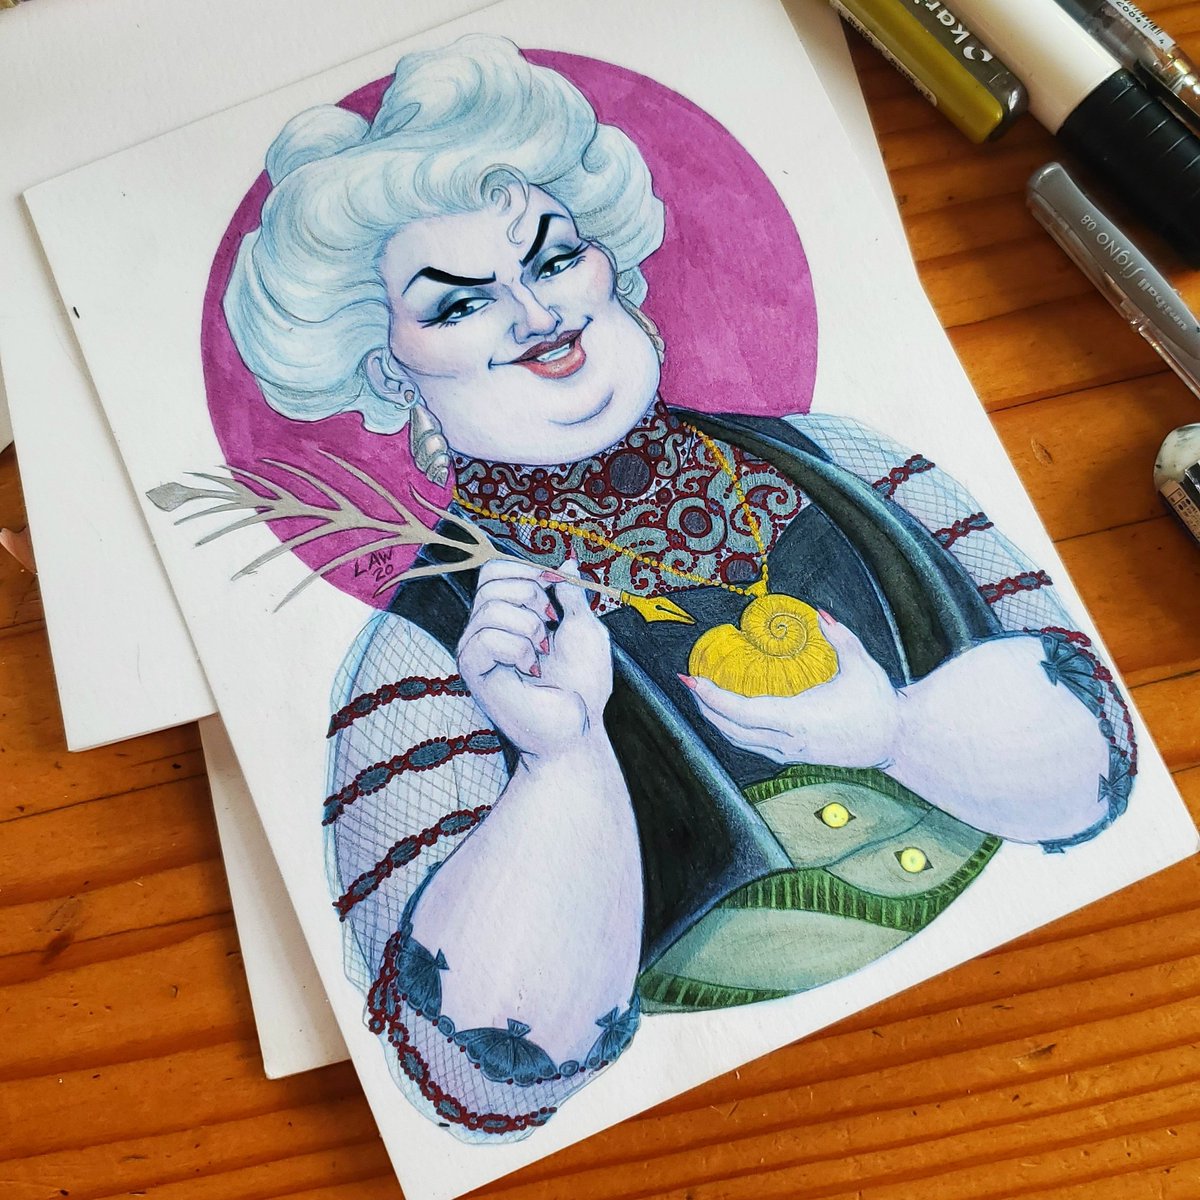 Due to #eccc2020 being postponed I am offering #commissions and #prints with free shipping for all who order in the next two weeks. Here is a #1890s #Ursula!

#commissionsopen #disneyfanart #disney #fanart #victorianfashion #seawitch #disneyvillain #art #curvygirl #ecccpostponed